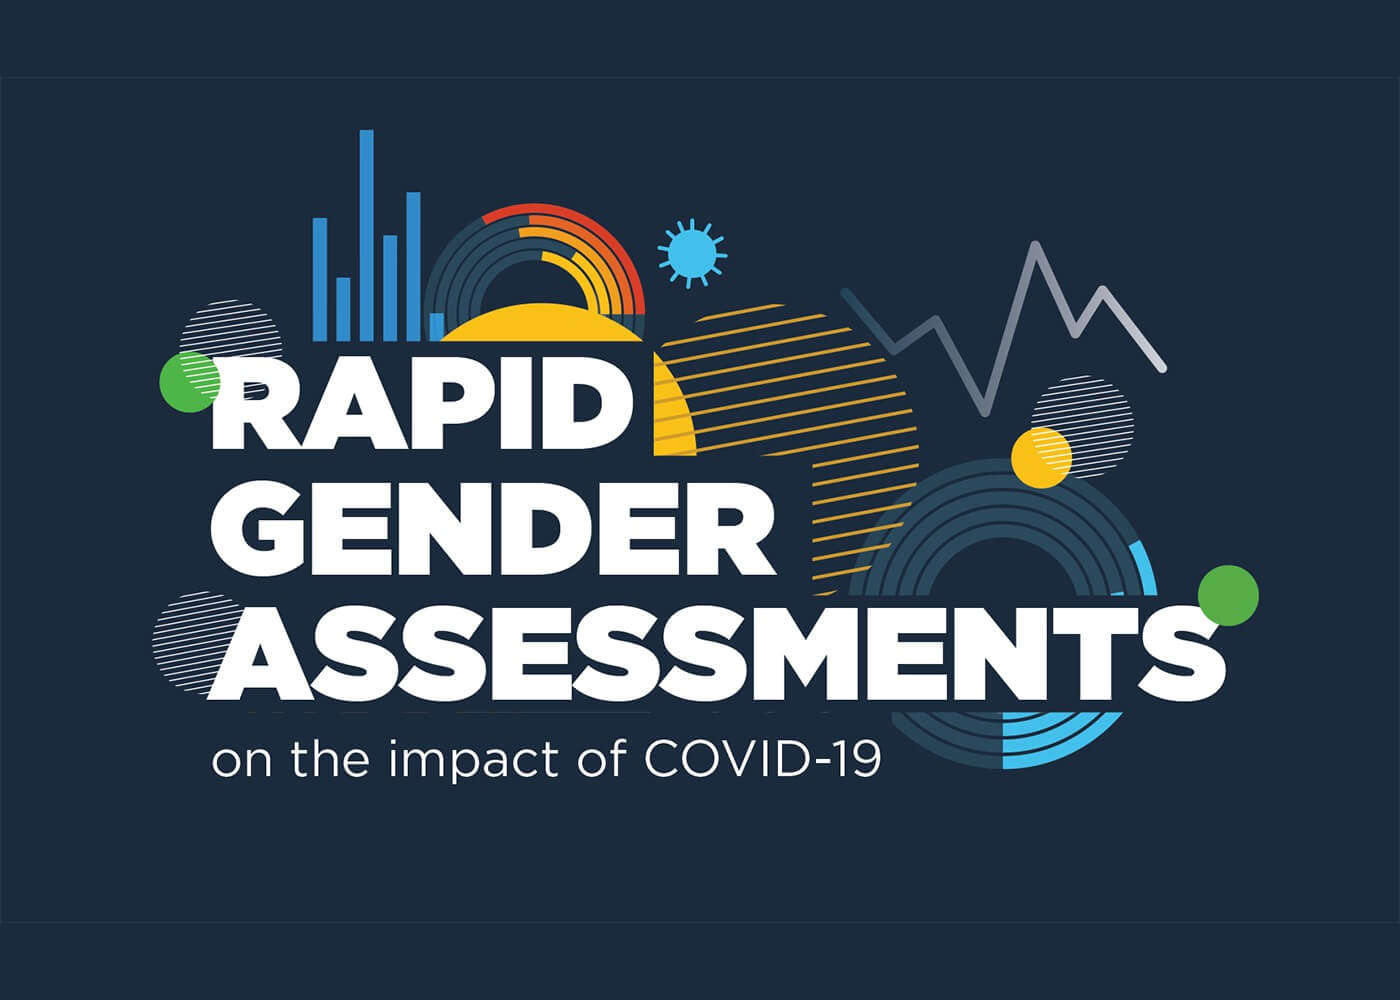 Results of the rapid gender assessment surveys on the impact of COVID-19 in Chile, Colombia, and Mexico